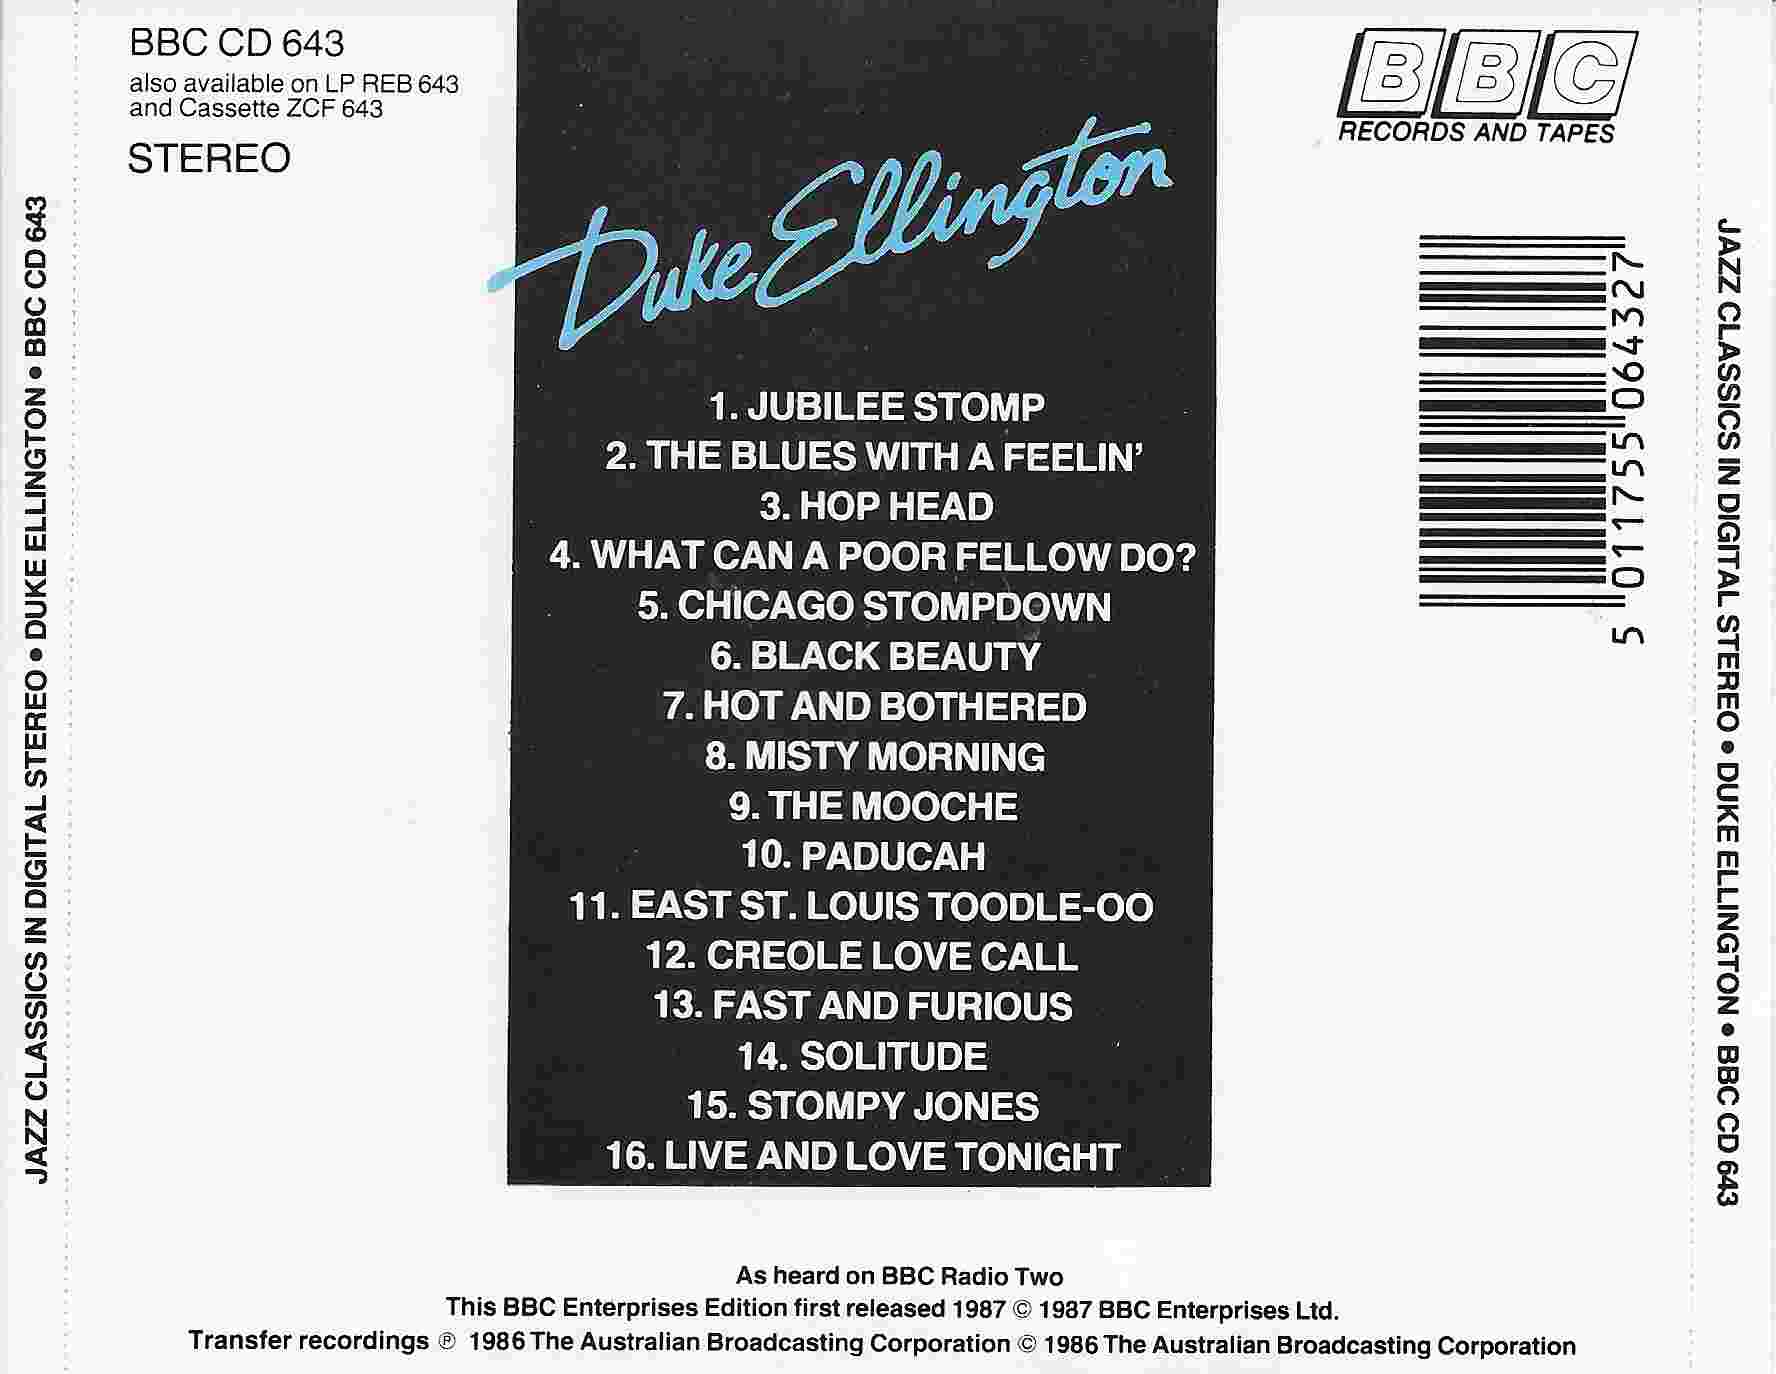 Picture of BBCCD643 Jazz classics - Duke Ellington by artist Duke Ellington from the BBC records and Tapes library